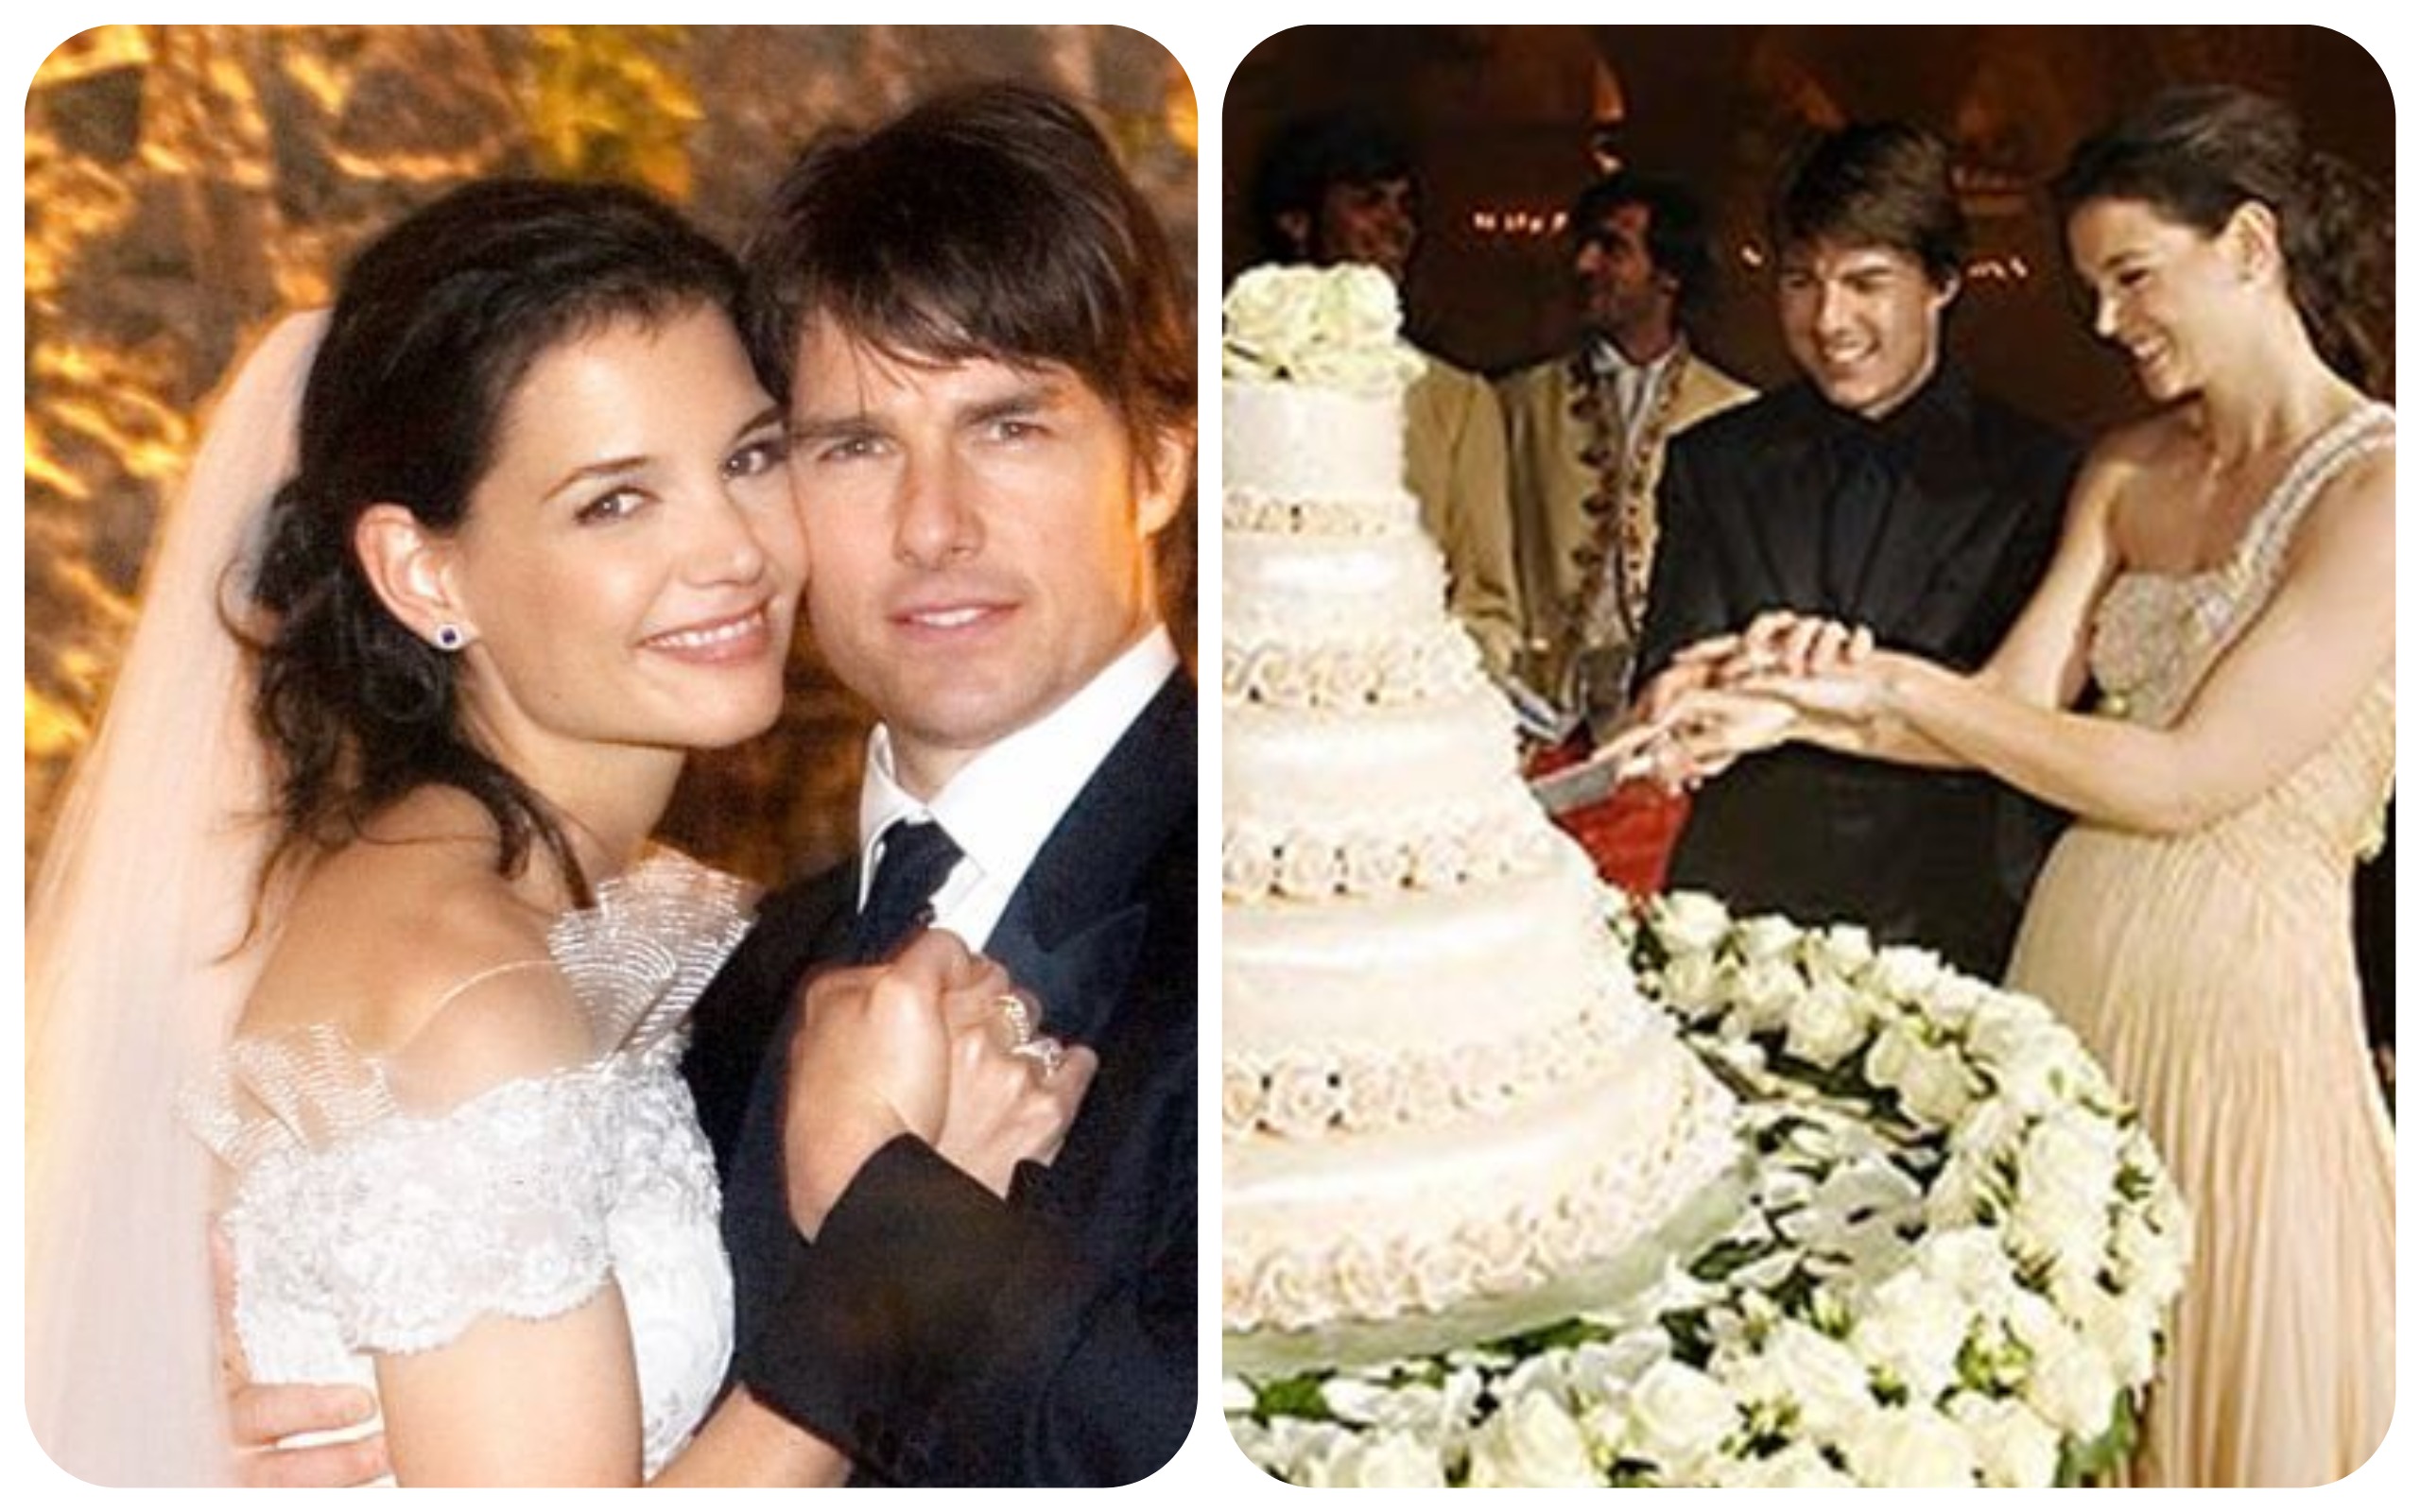 new-detail-about-tom-cruise-katie-holmes-2006-wedding